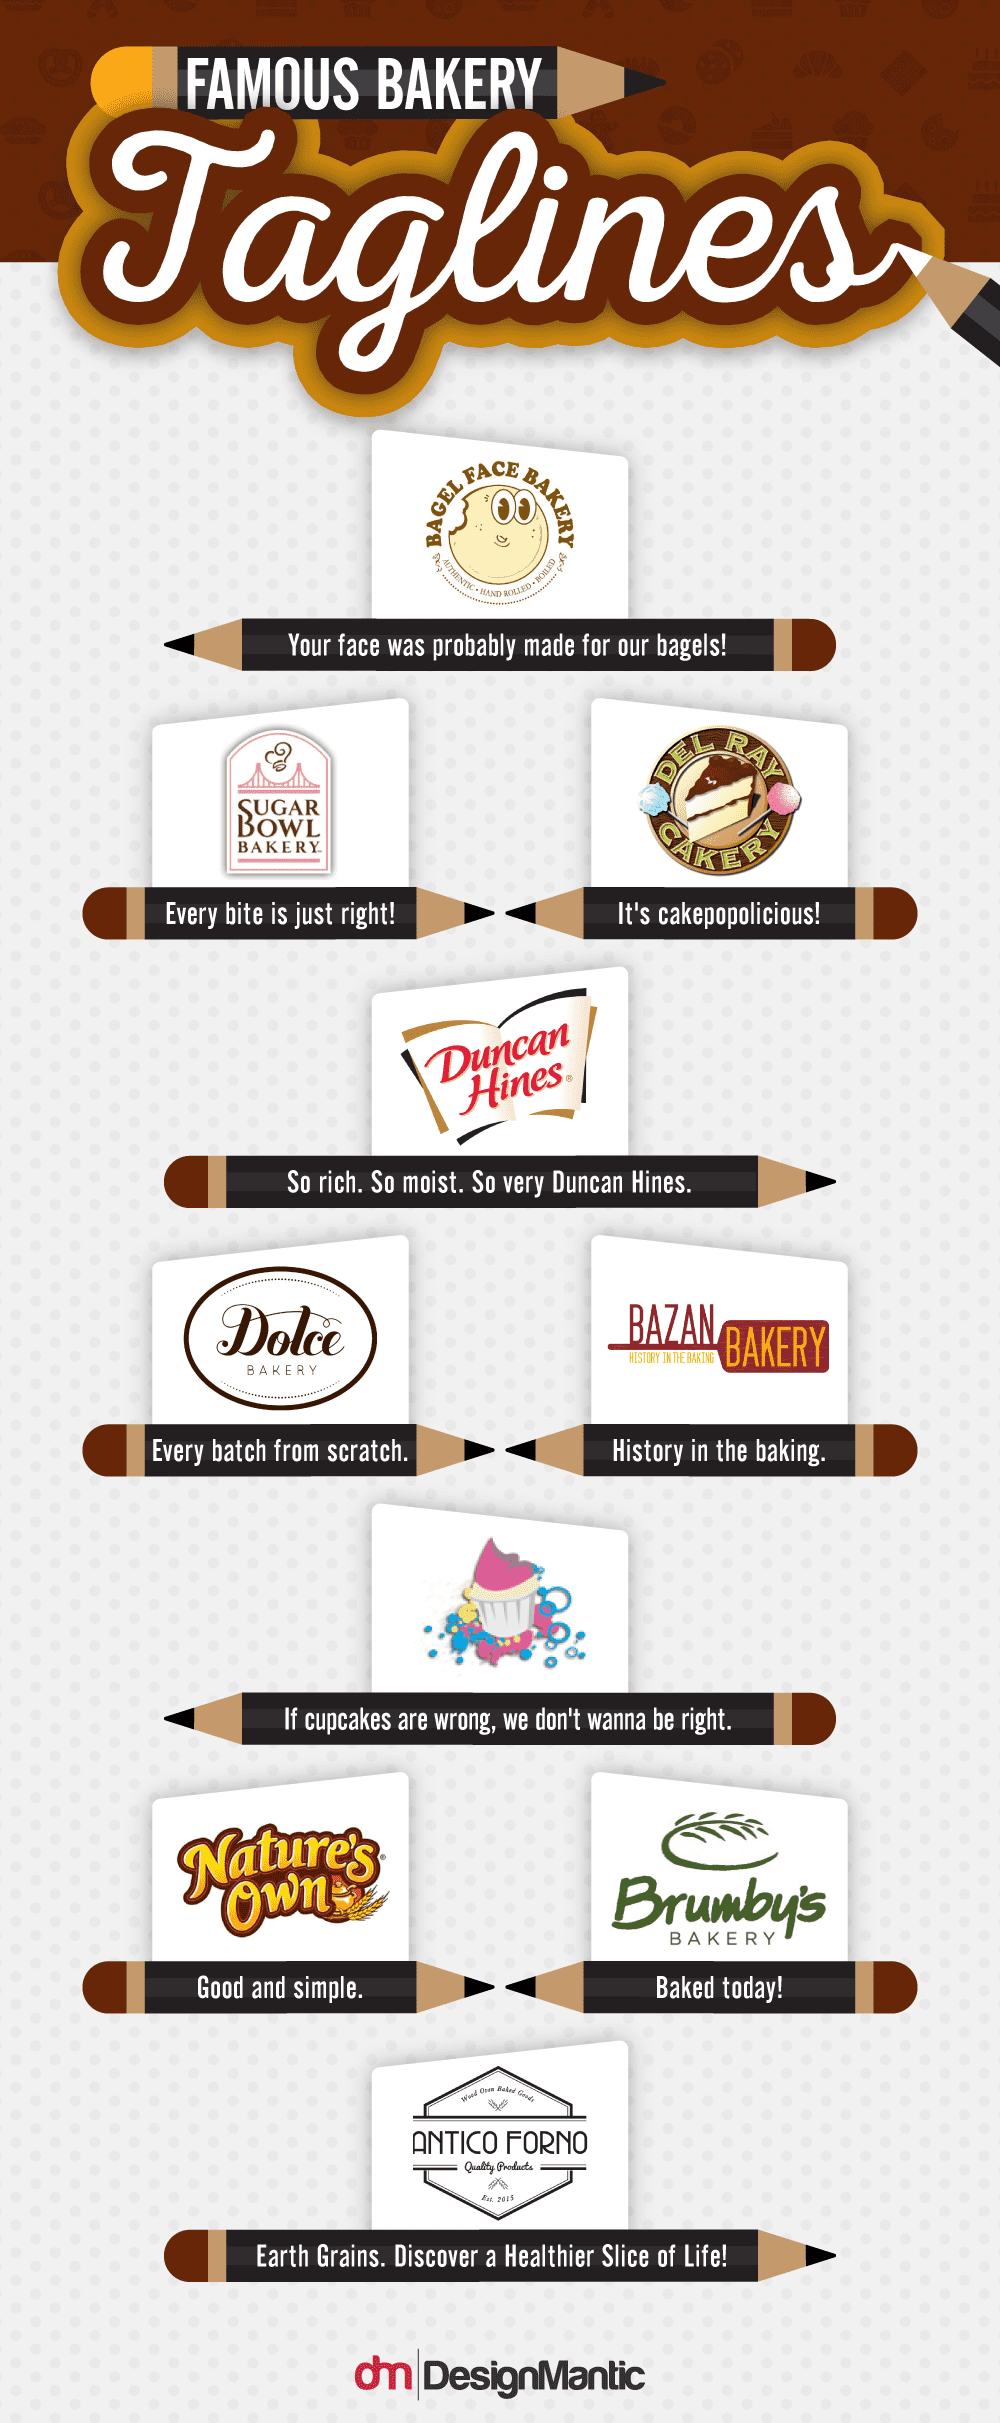 famous bakery taglines